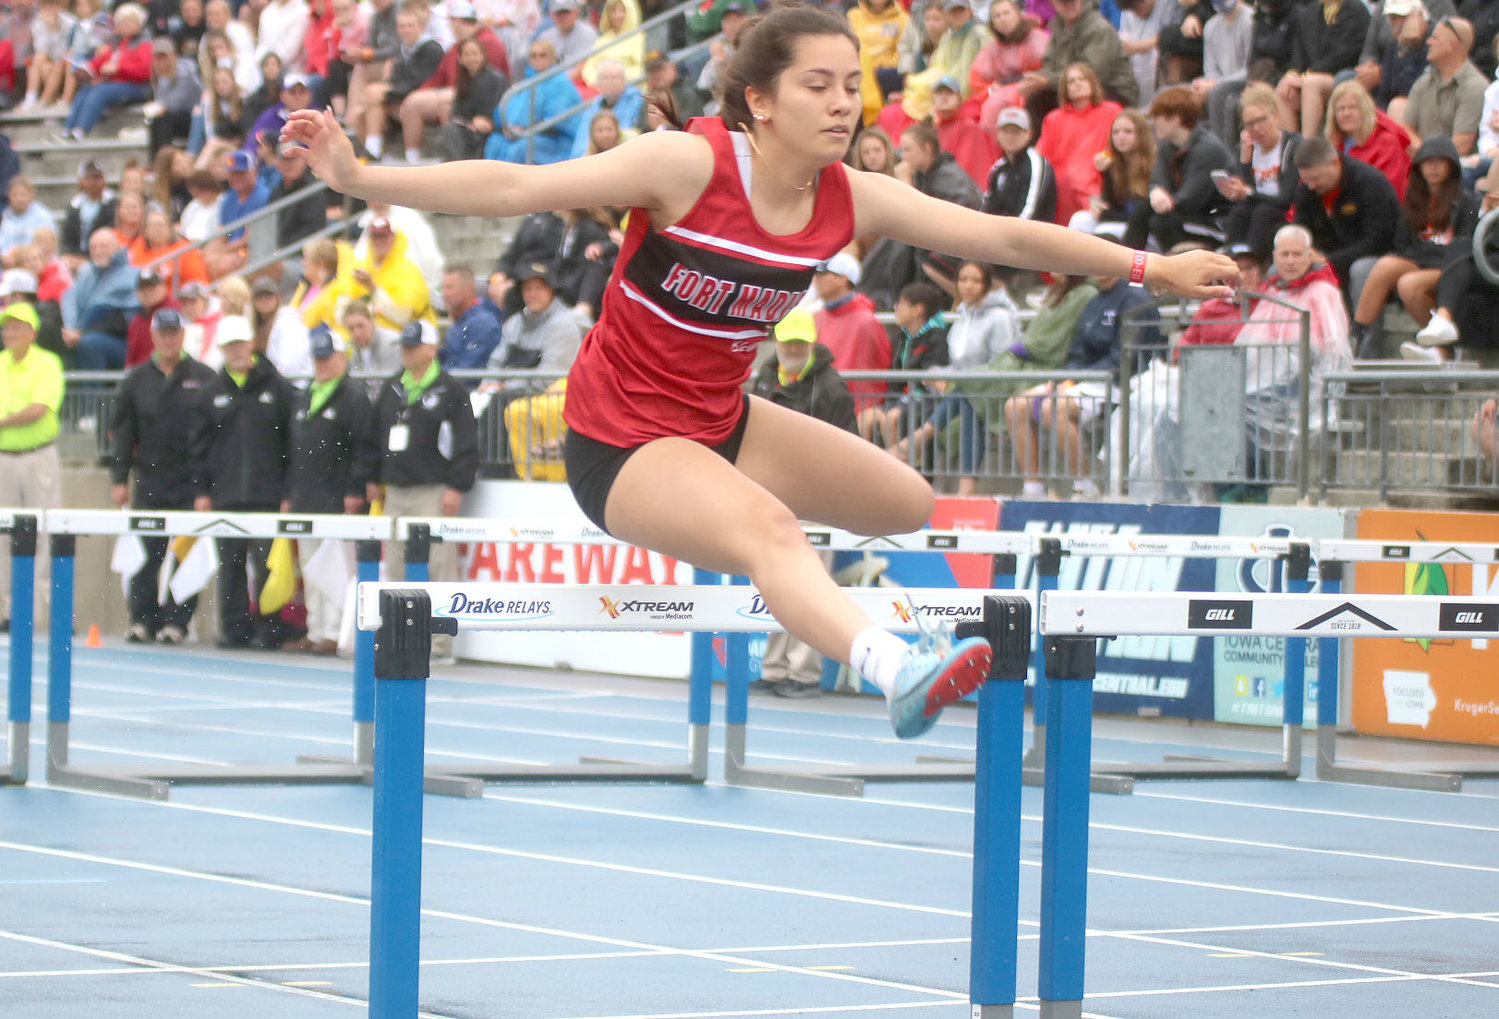 Fort Madison senior Reyna Lampe gets over the second hurdle in the shuttle hurdle relay Thursday morning at the IHSAA/IGHSAU Co-Ed High School State Track and Field Championships. Photo by Chuck Vandenberg/PCC